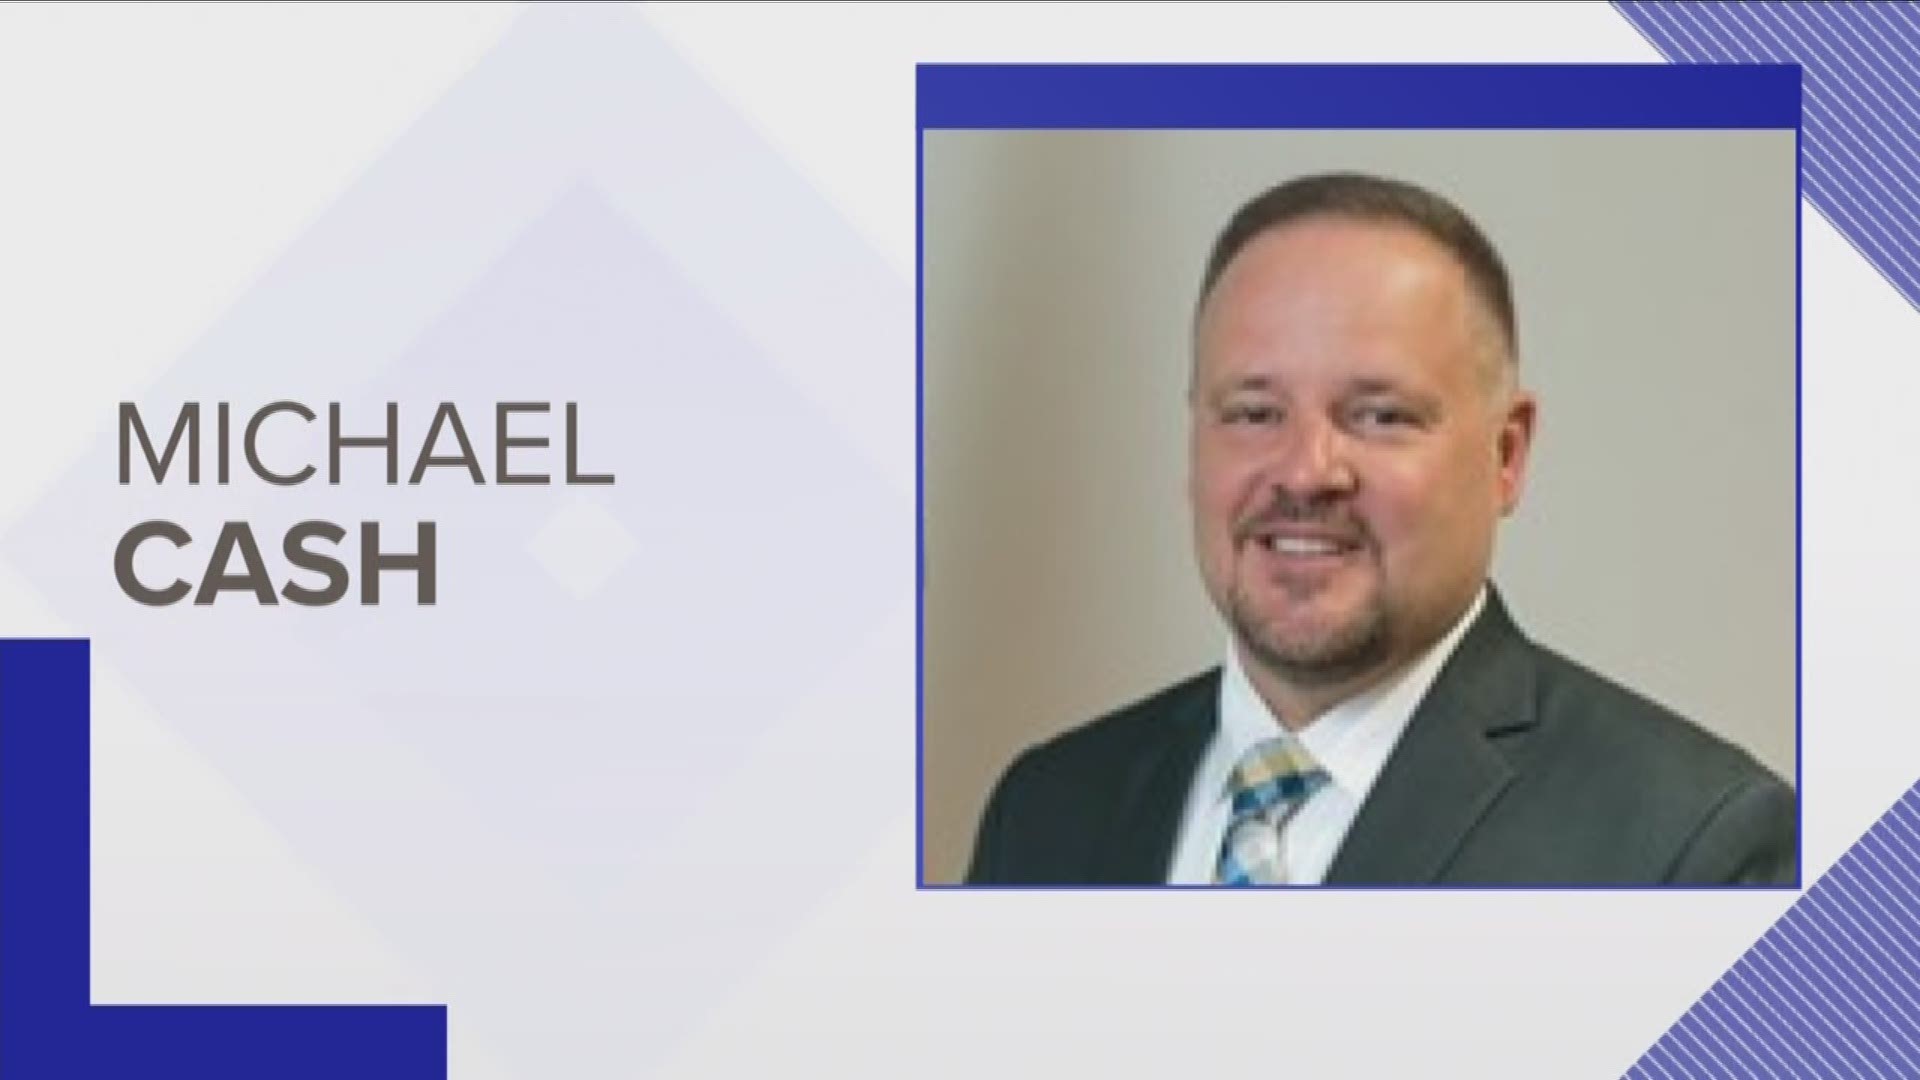 The McCreary County Superintendent Michael Cash has resigned after a heated school board meeting.
The school board's attorney says he was suspended for a video that showed him engaging in inappropriate behavior.